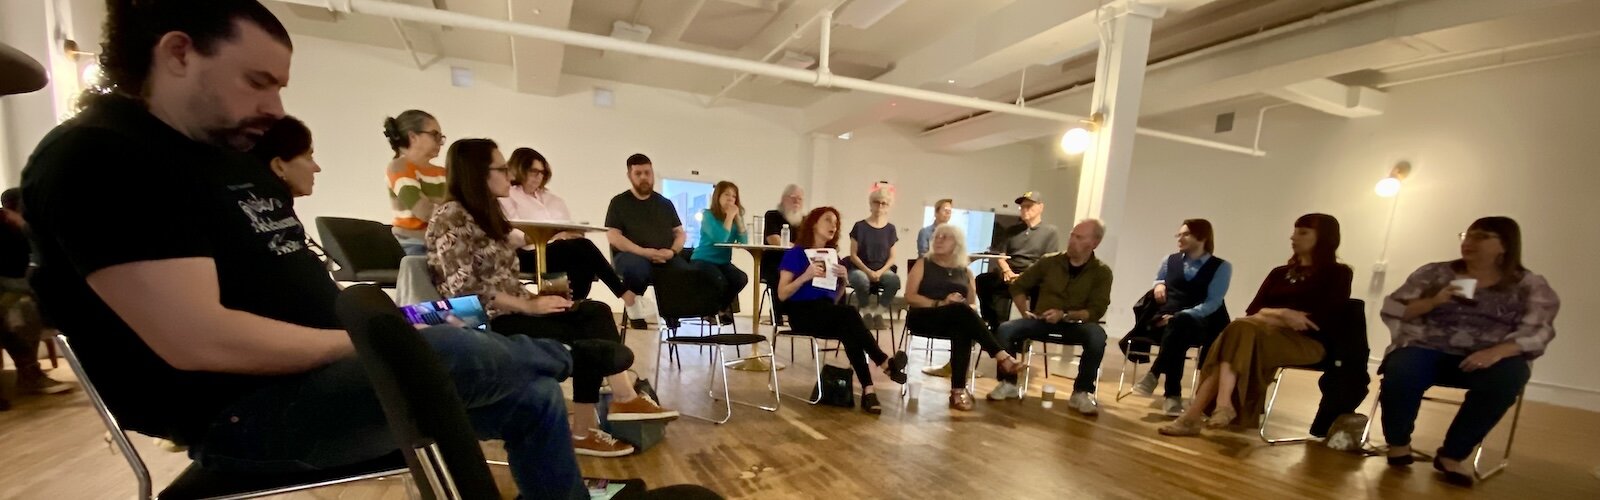 The Ybor City Ad Hoc Arts Group 's monthly meeting at the Kress Building is a forum to talk about what's new and what's next in the Ybor arts scene.